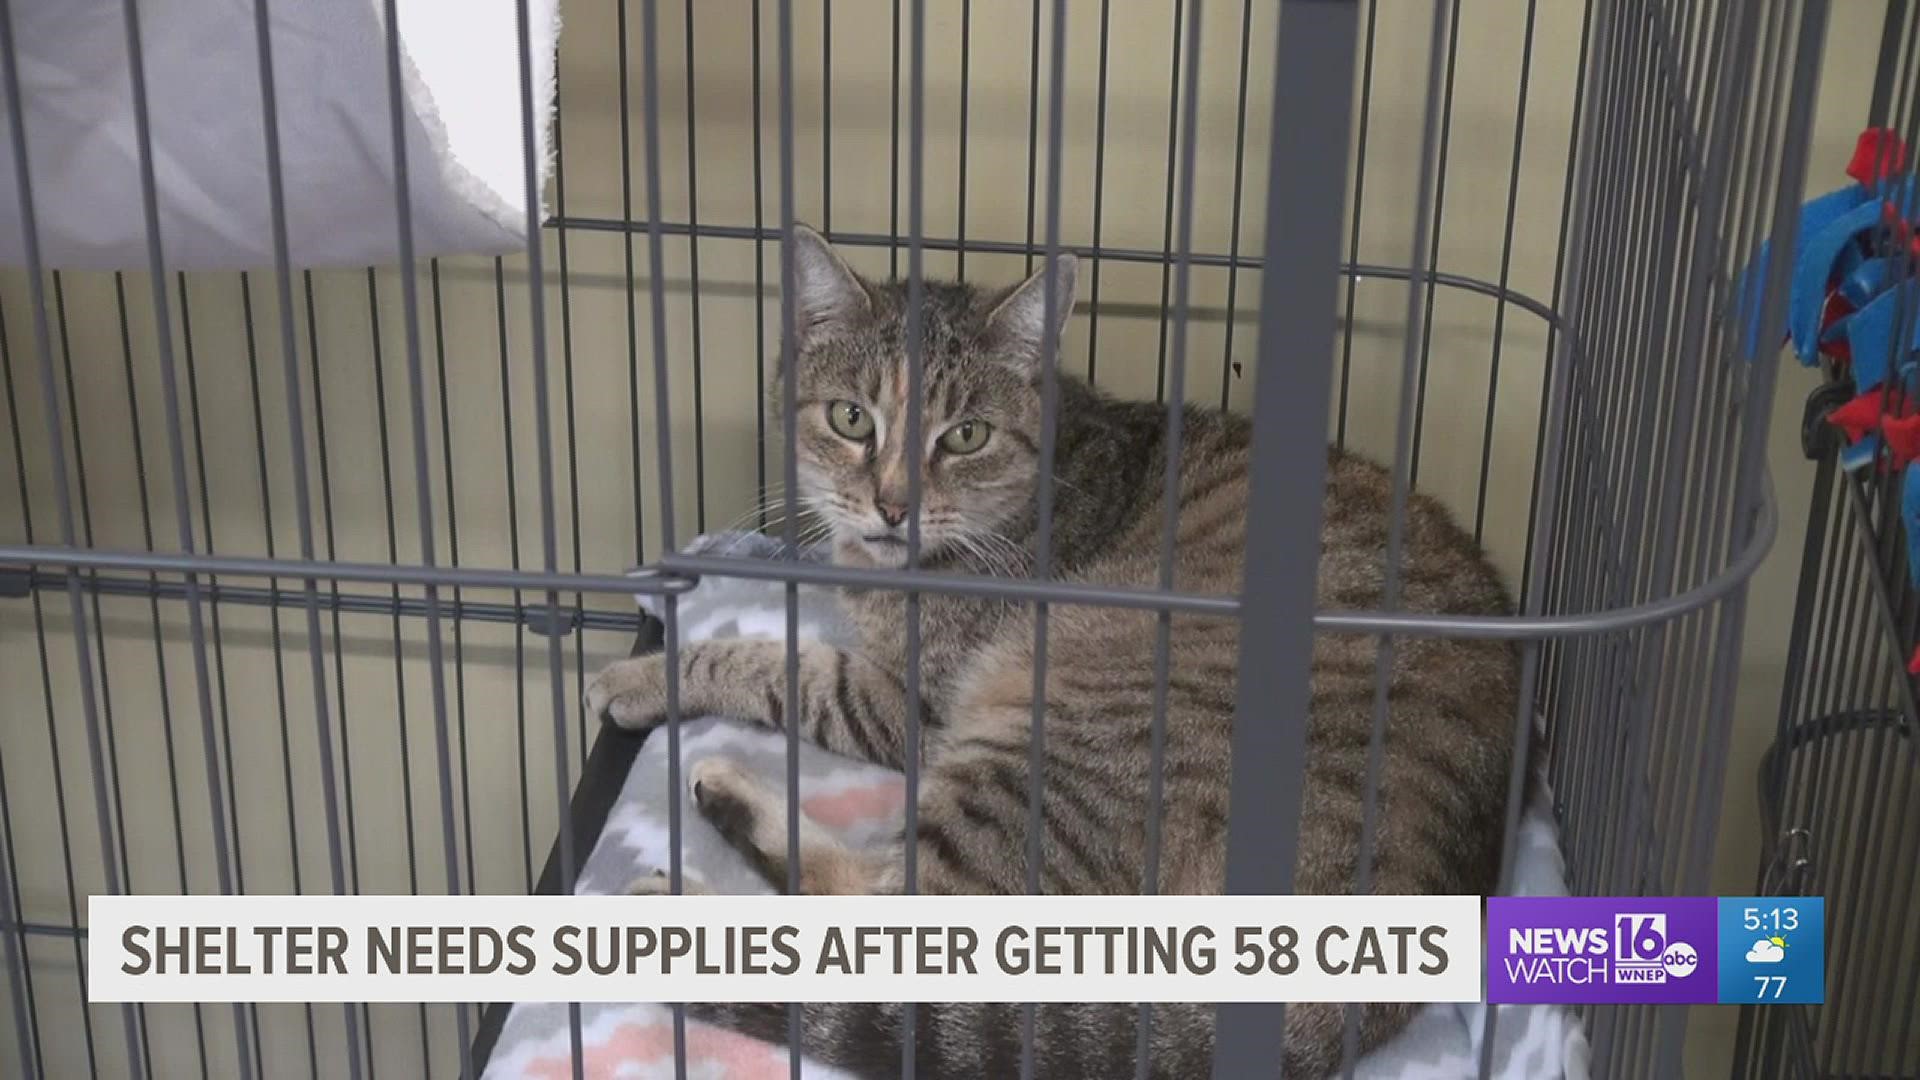 An animal shelter in Columbia County took in nearly 60 cats from a hoarding situation and now could use some supplies.